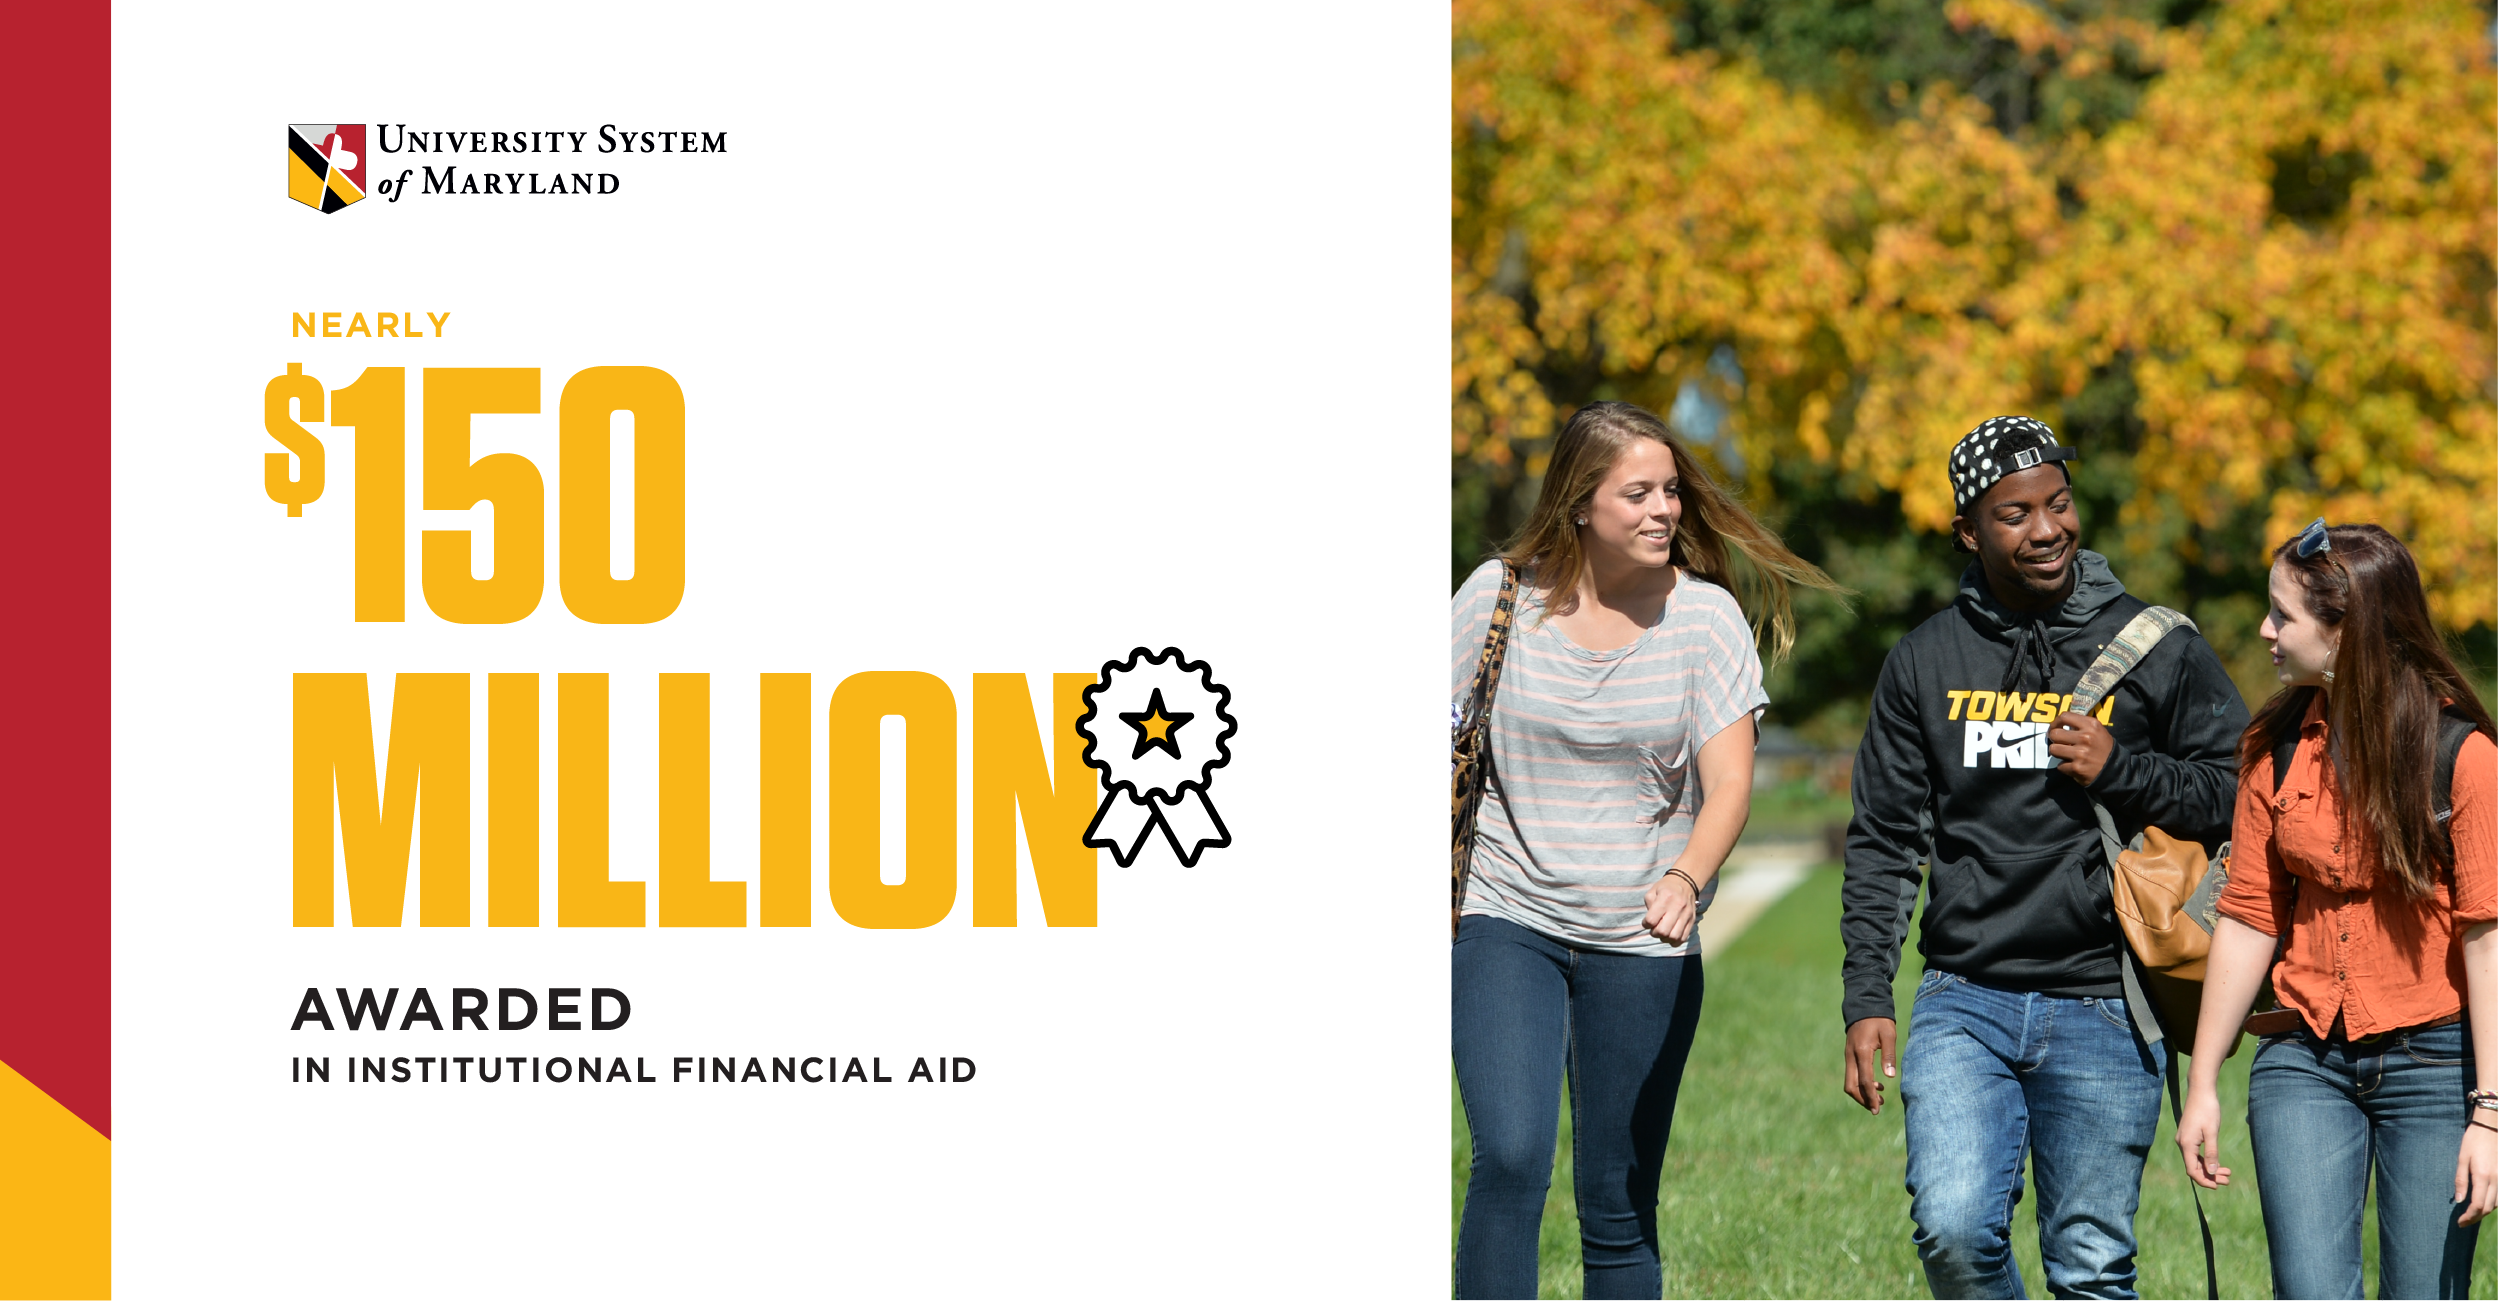 $150 Million in Institutional Financial Aid Awarded